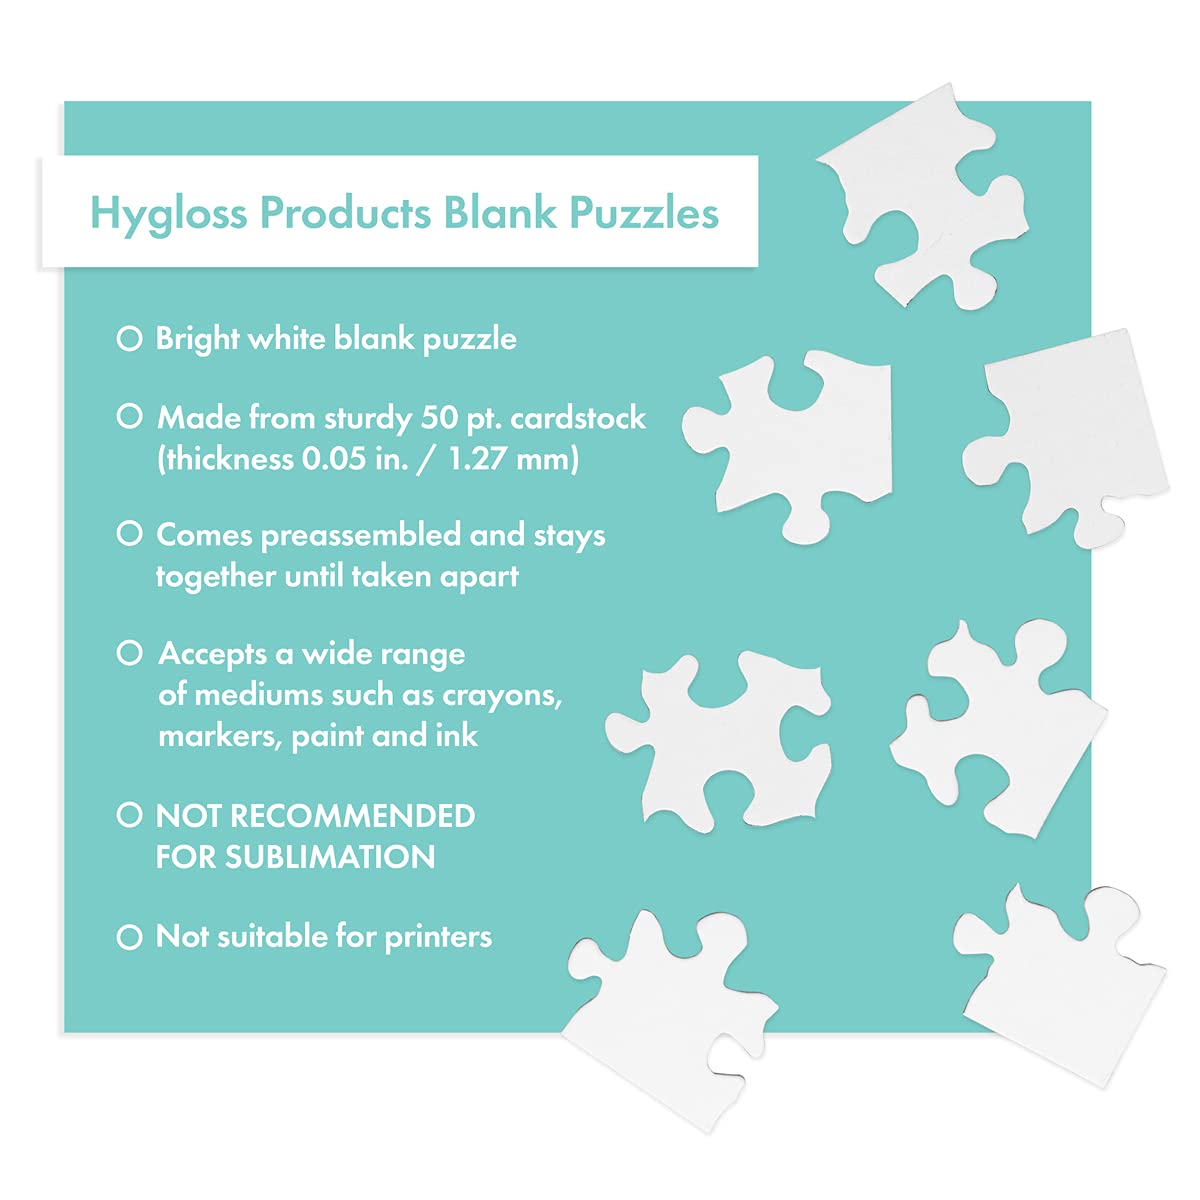 Hygloss Products - Blank Heart Puzzle for Decorating, Jigsaw Activity, Use As Party Favors, DIY Invites and More - White, Sturdy – 6 x 8 Inches, 8 Pieces, 24 Puzzles